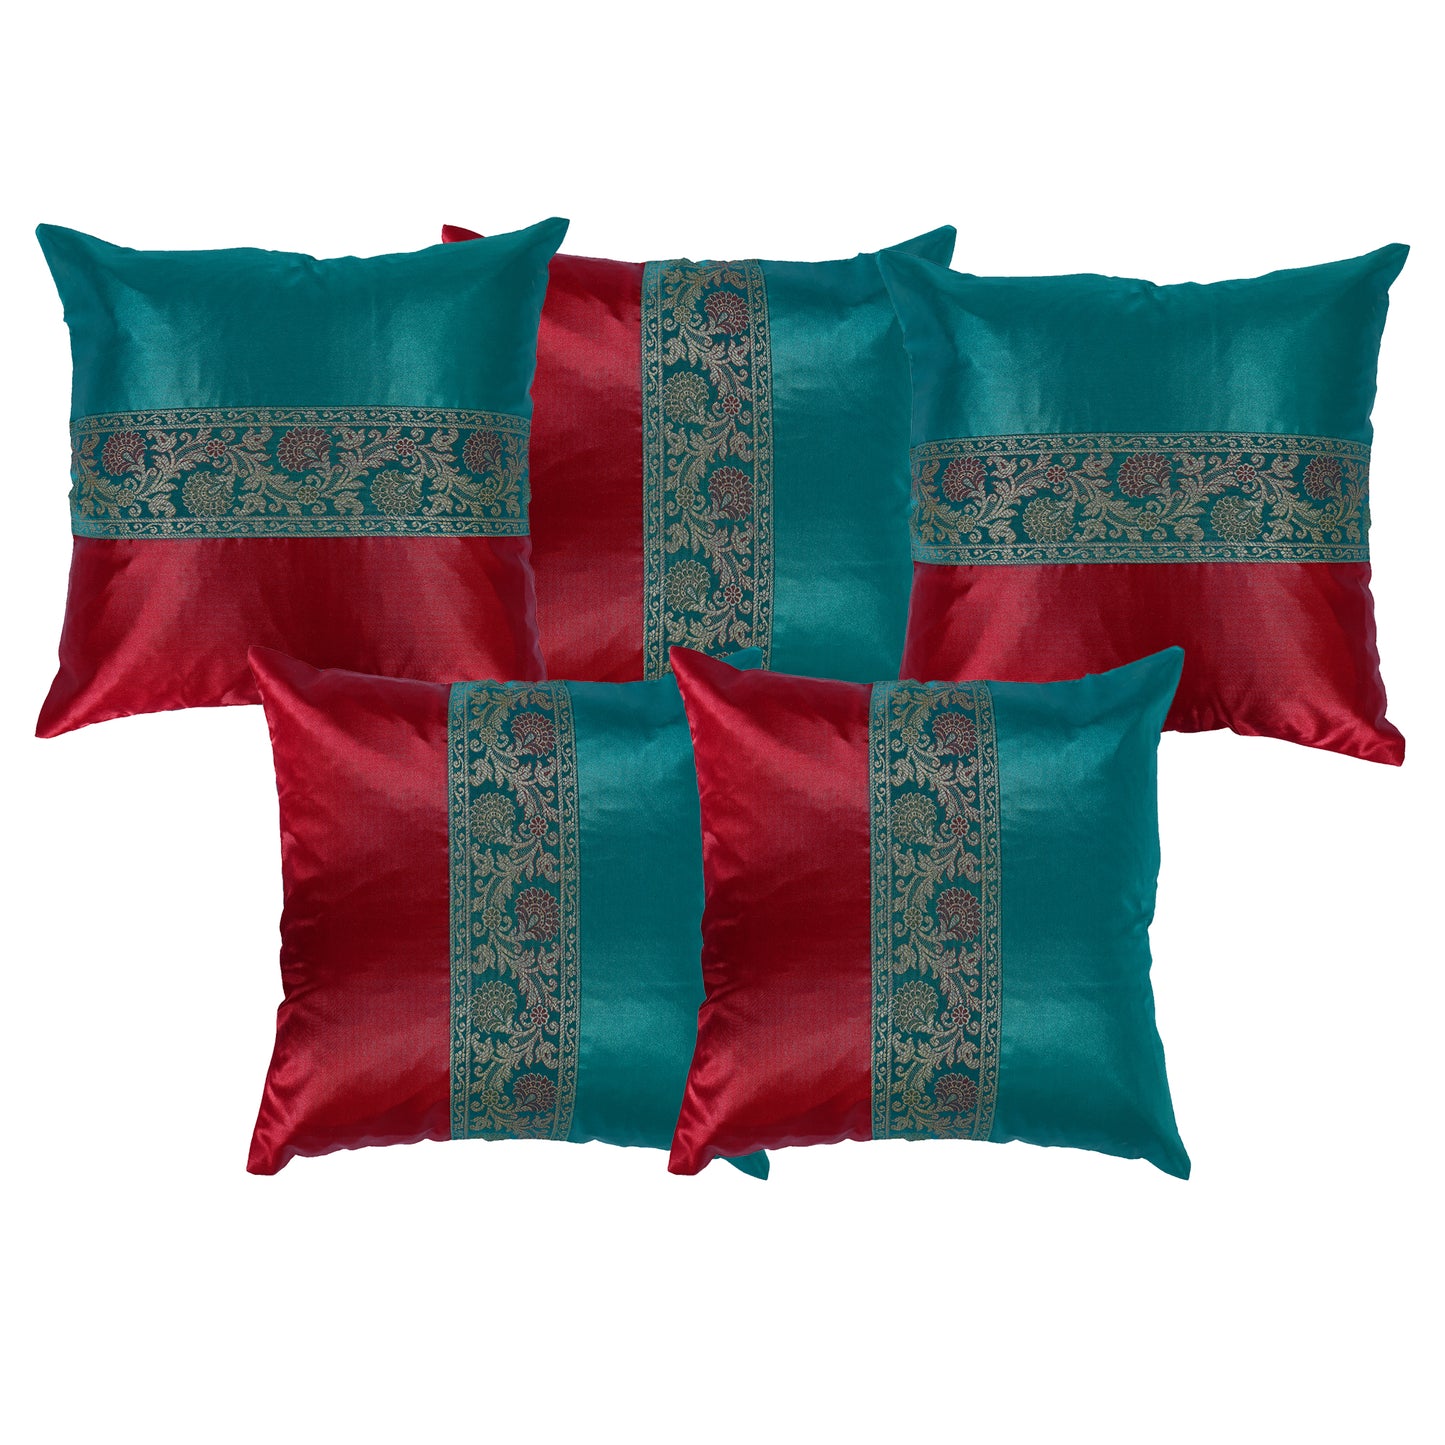 Set of 2 Pc Indian Solid Soft Silky Satin Sea Green & Red Cushion Covers Square Throw Decorative Pillowcases for Couch Sofa Home Décor 16X16 In